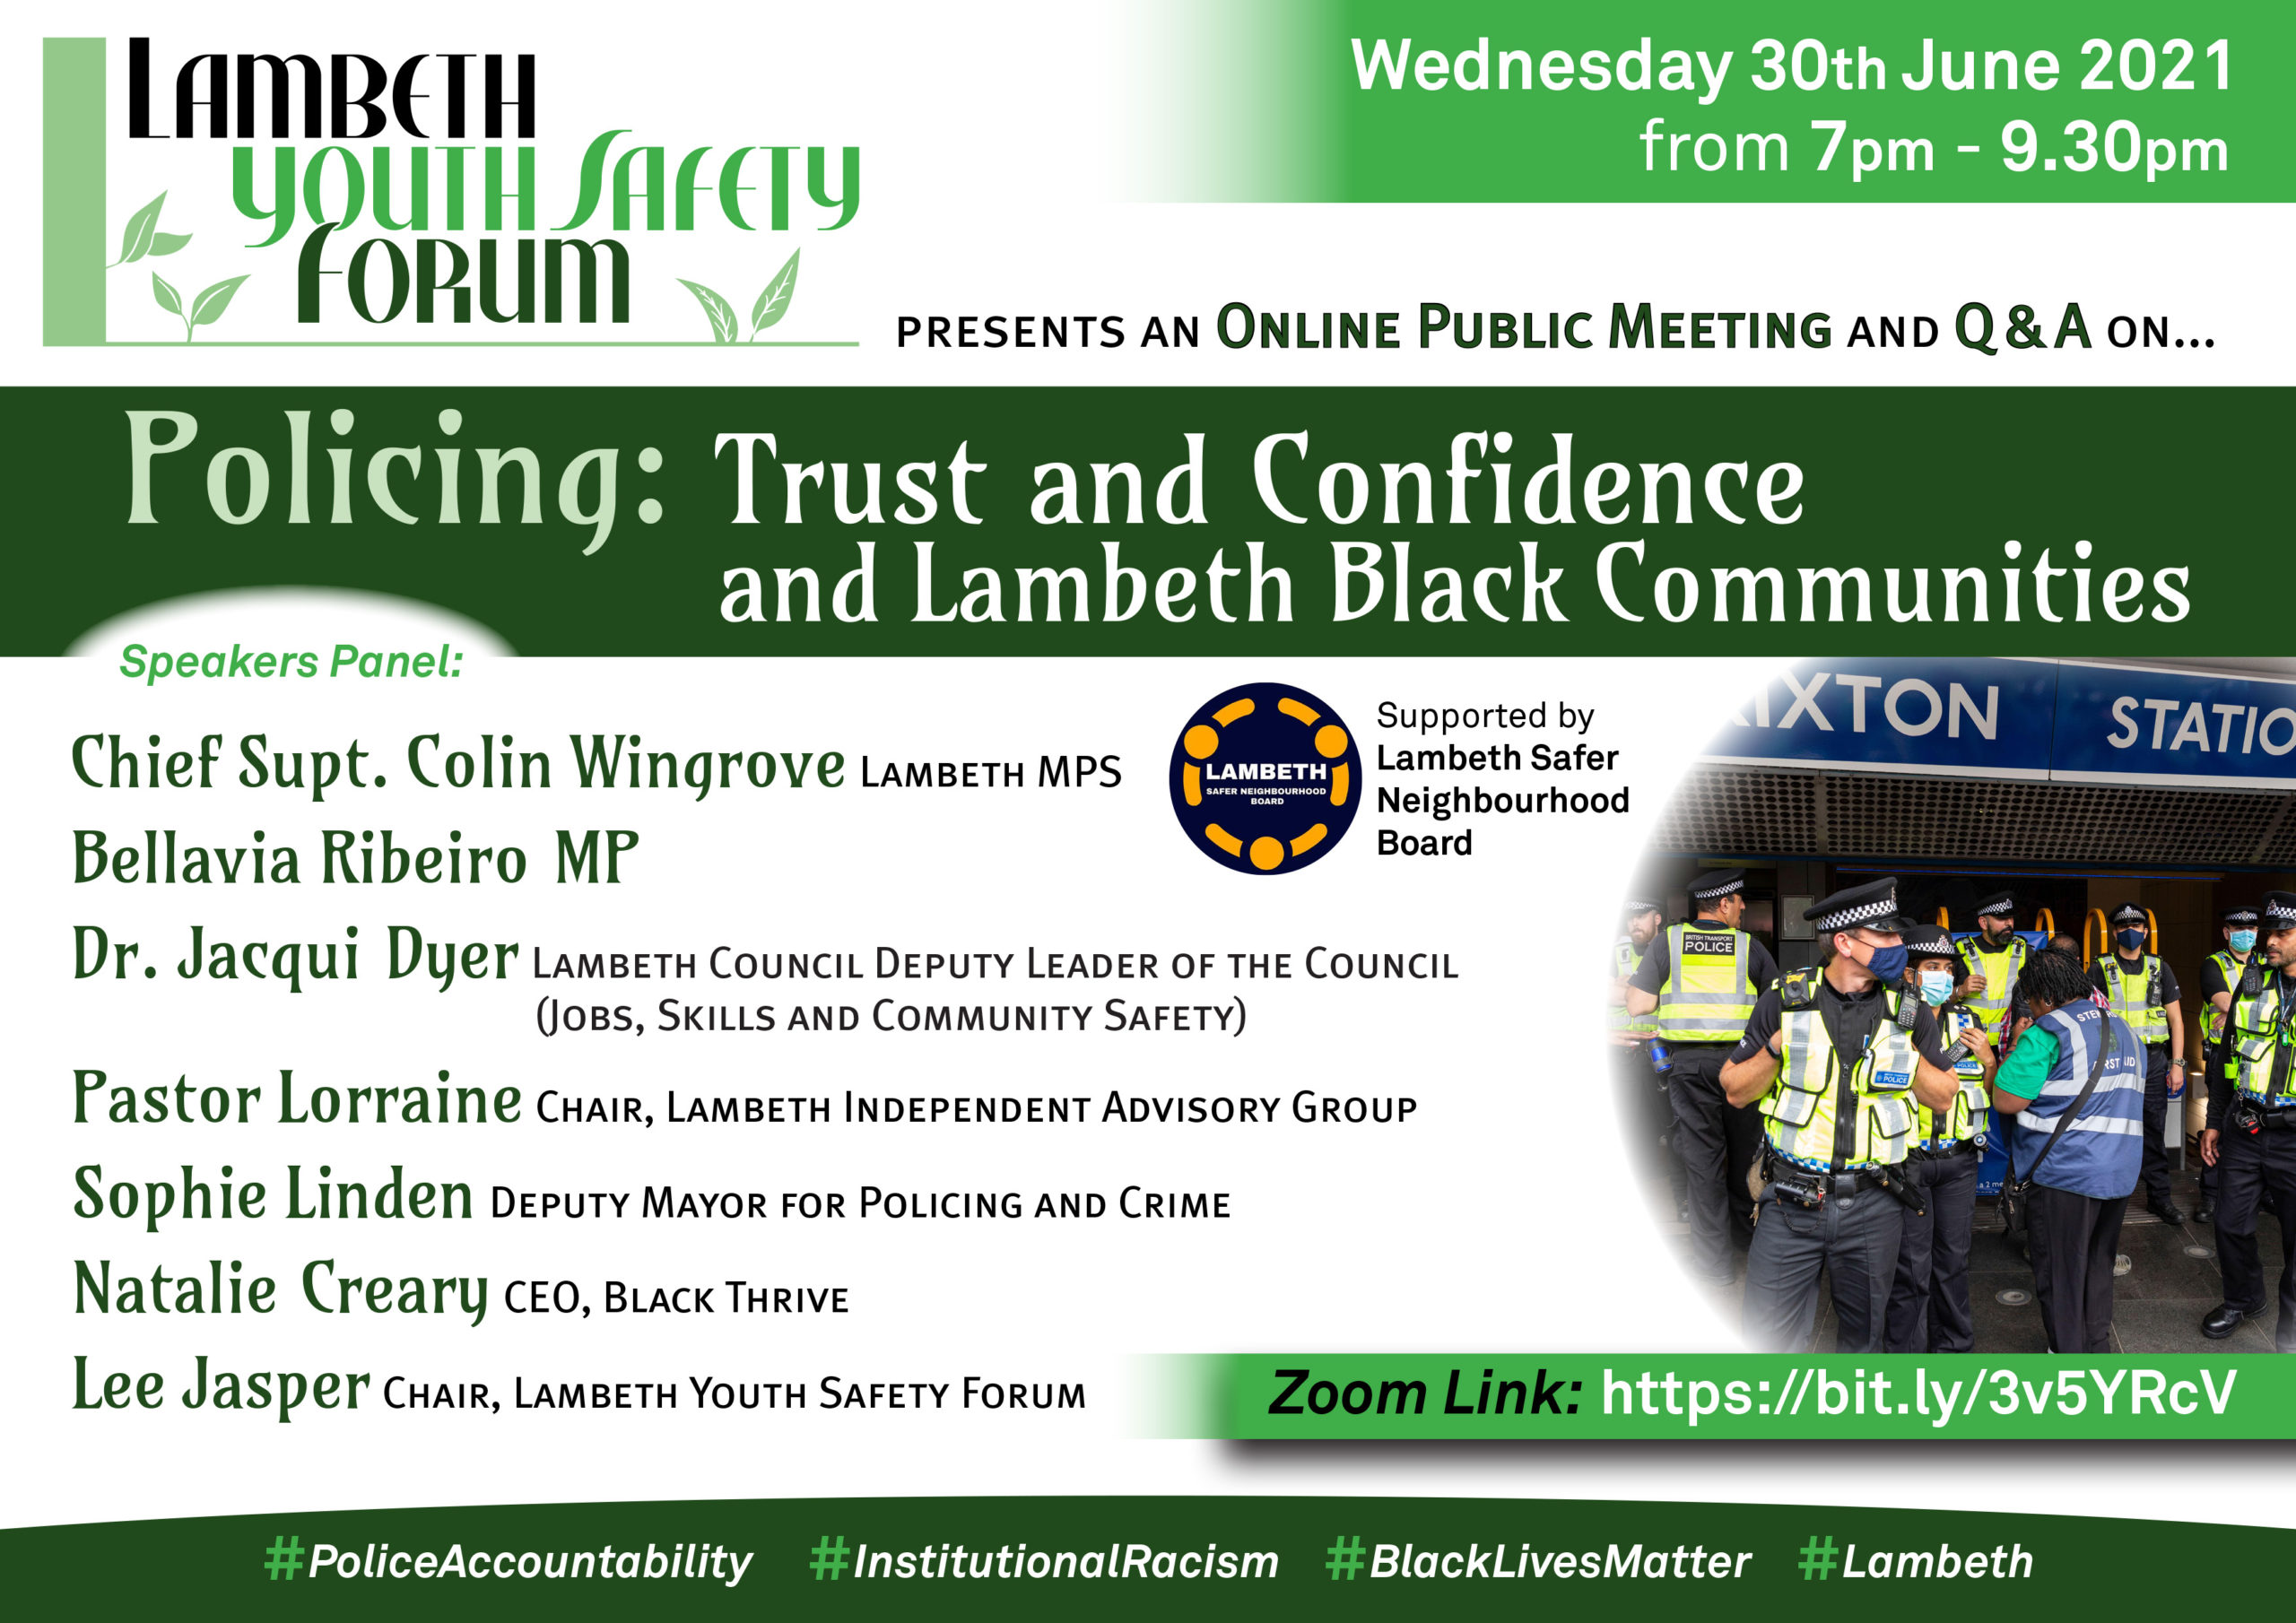 Lambeth: Building trust in the police among Black communities